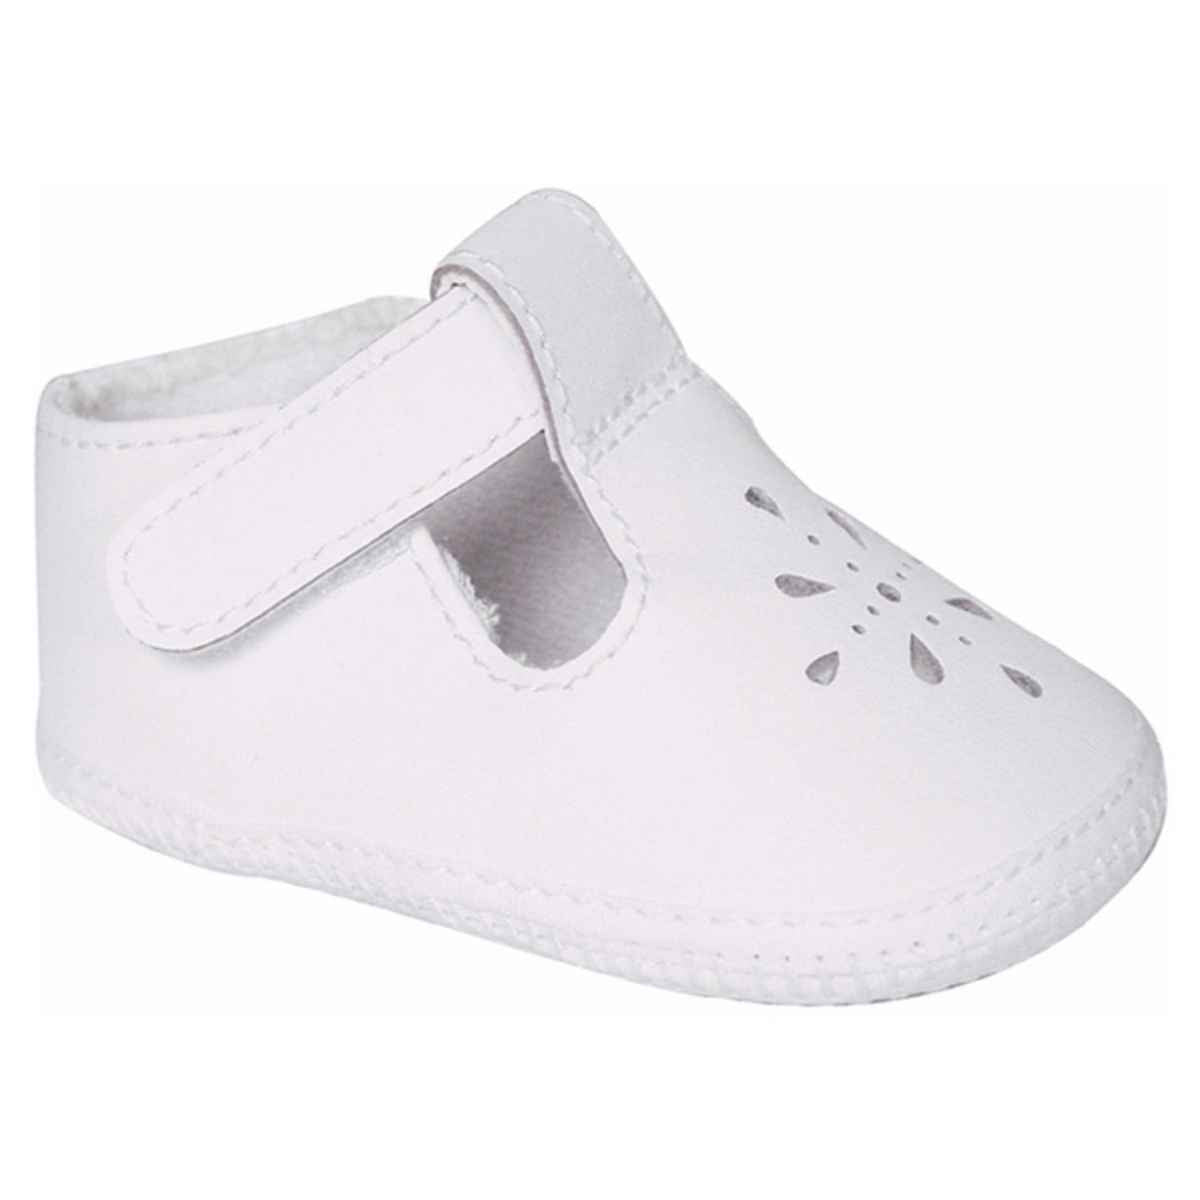 Baby Deer - Kennedy White Leather Perforated T-Strap